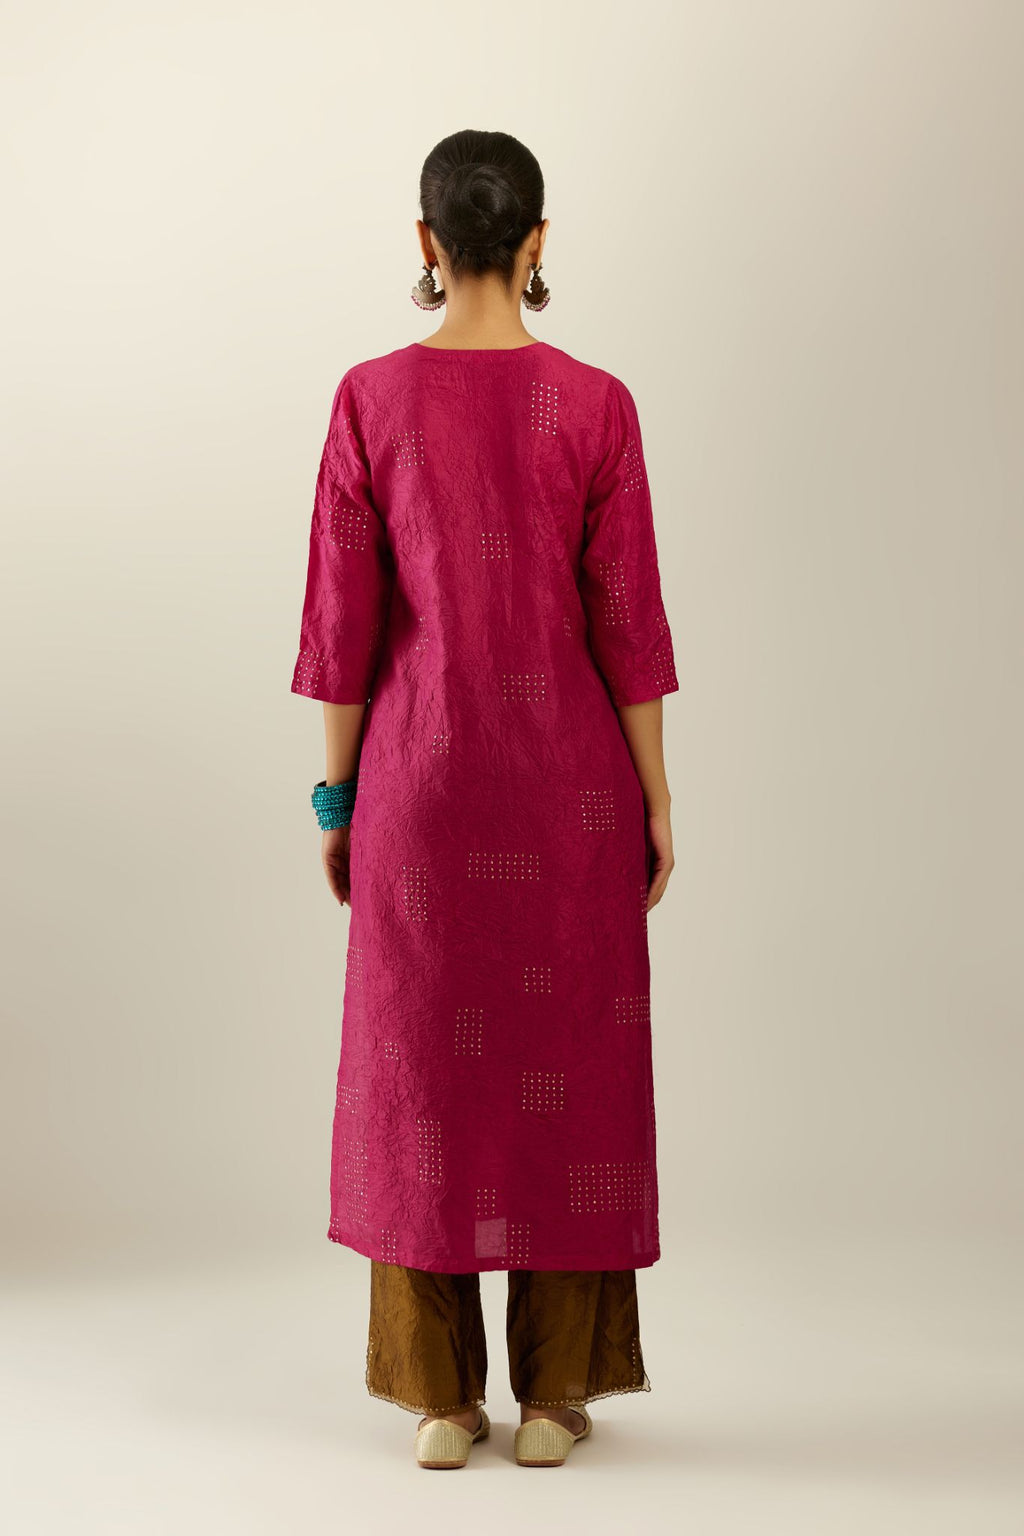 Jazzberry jam hand crushed silk straight kurta, highlighted with all-over gold sequins rectangles, paired with  golden olive hand crushed silk straight pants with scalloped and embroidered organza at edges.